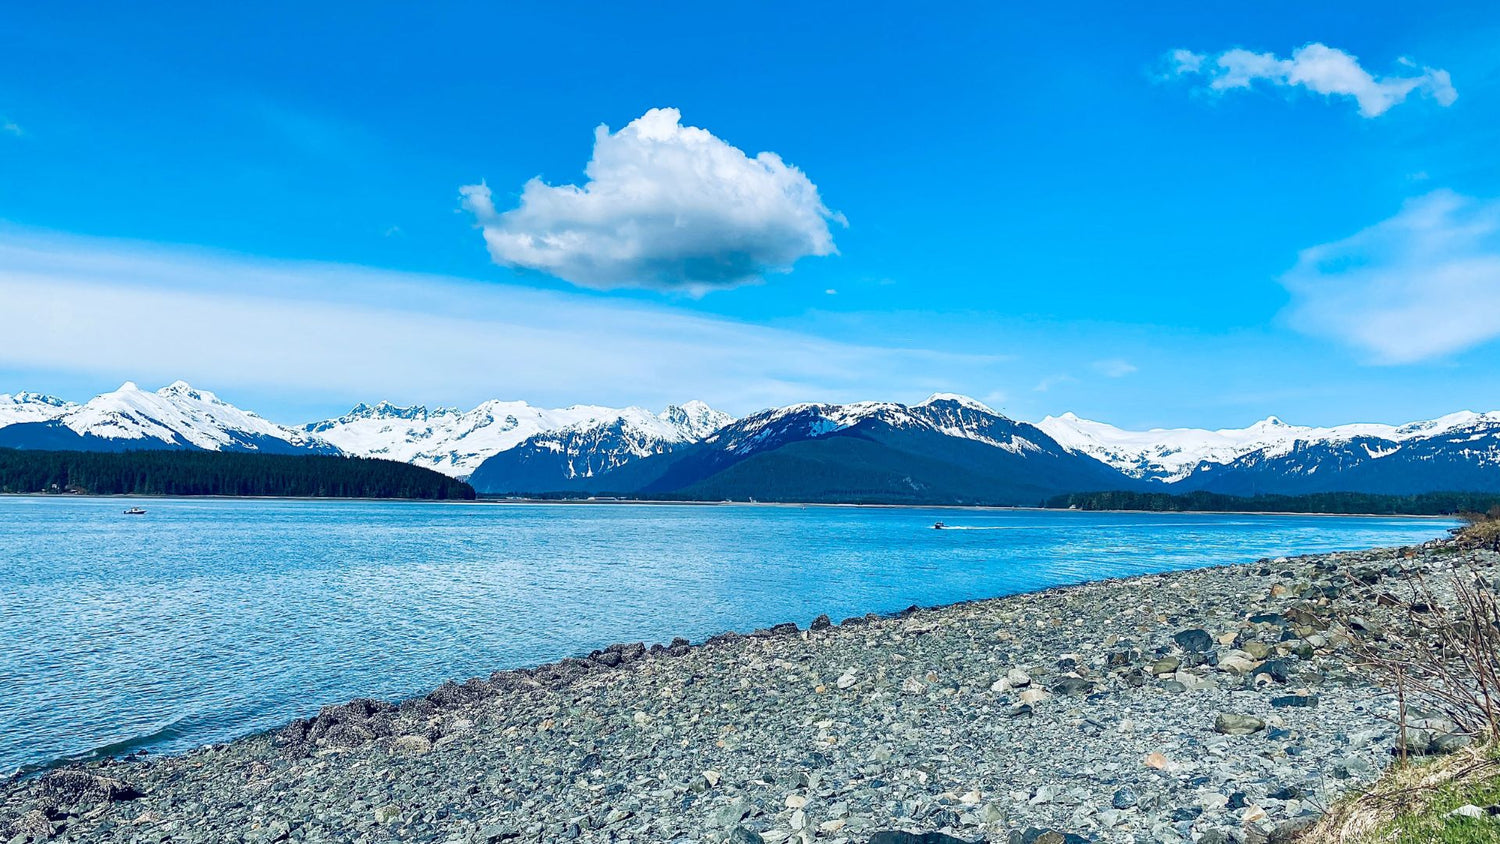 Gray rocks near a body of water under a blue sky during daytime in Douglas, Alaska. - History By Mail